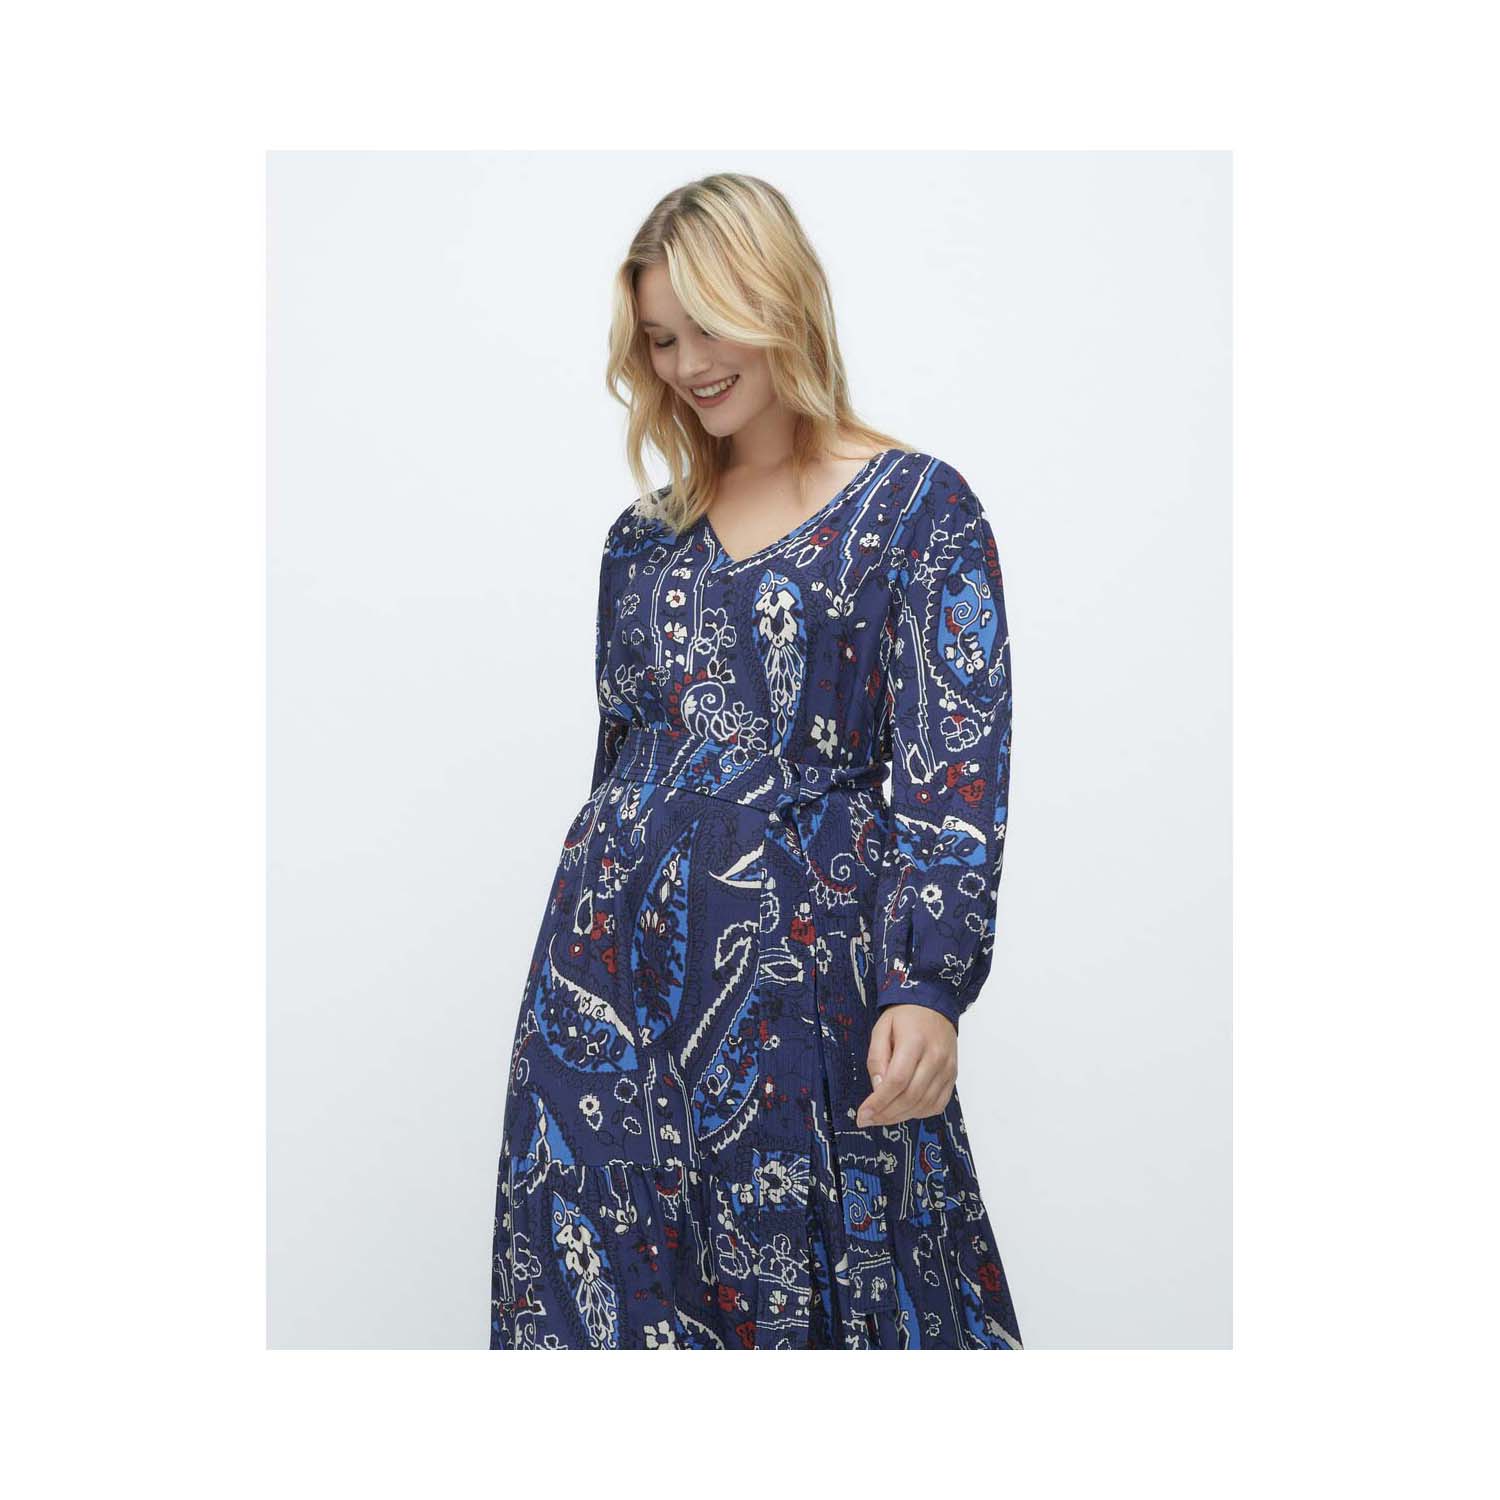 Couchel Long-Sleeved Floral Dress - Multi 3 Shaws Department Stores